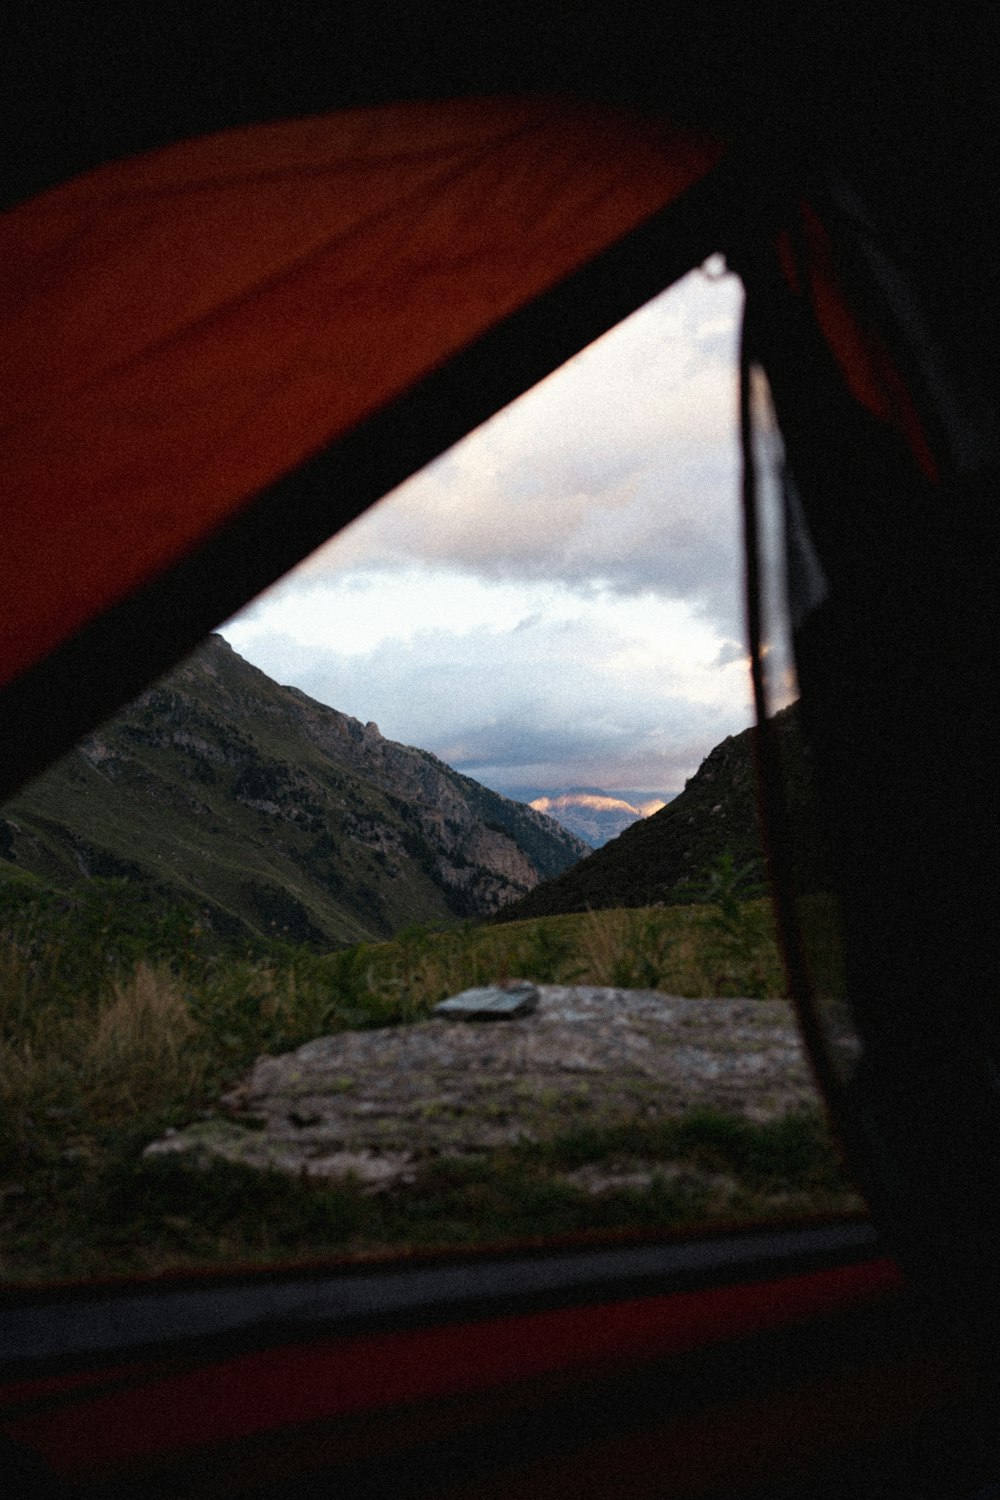 a view from inside a tent of a mountain range